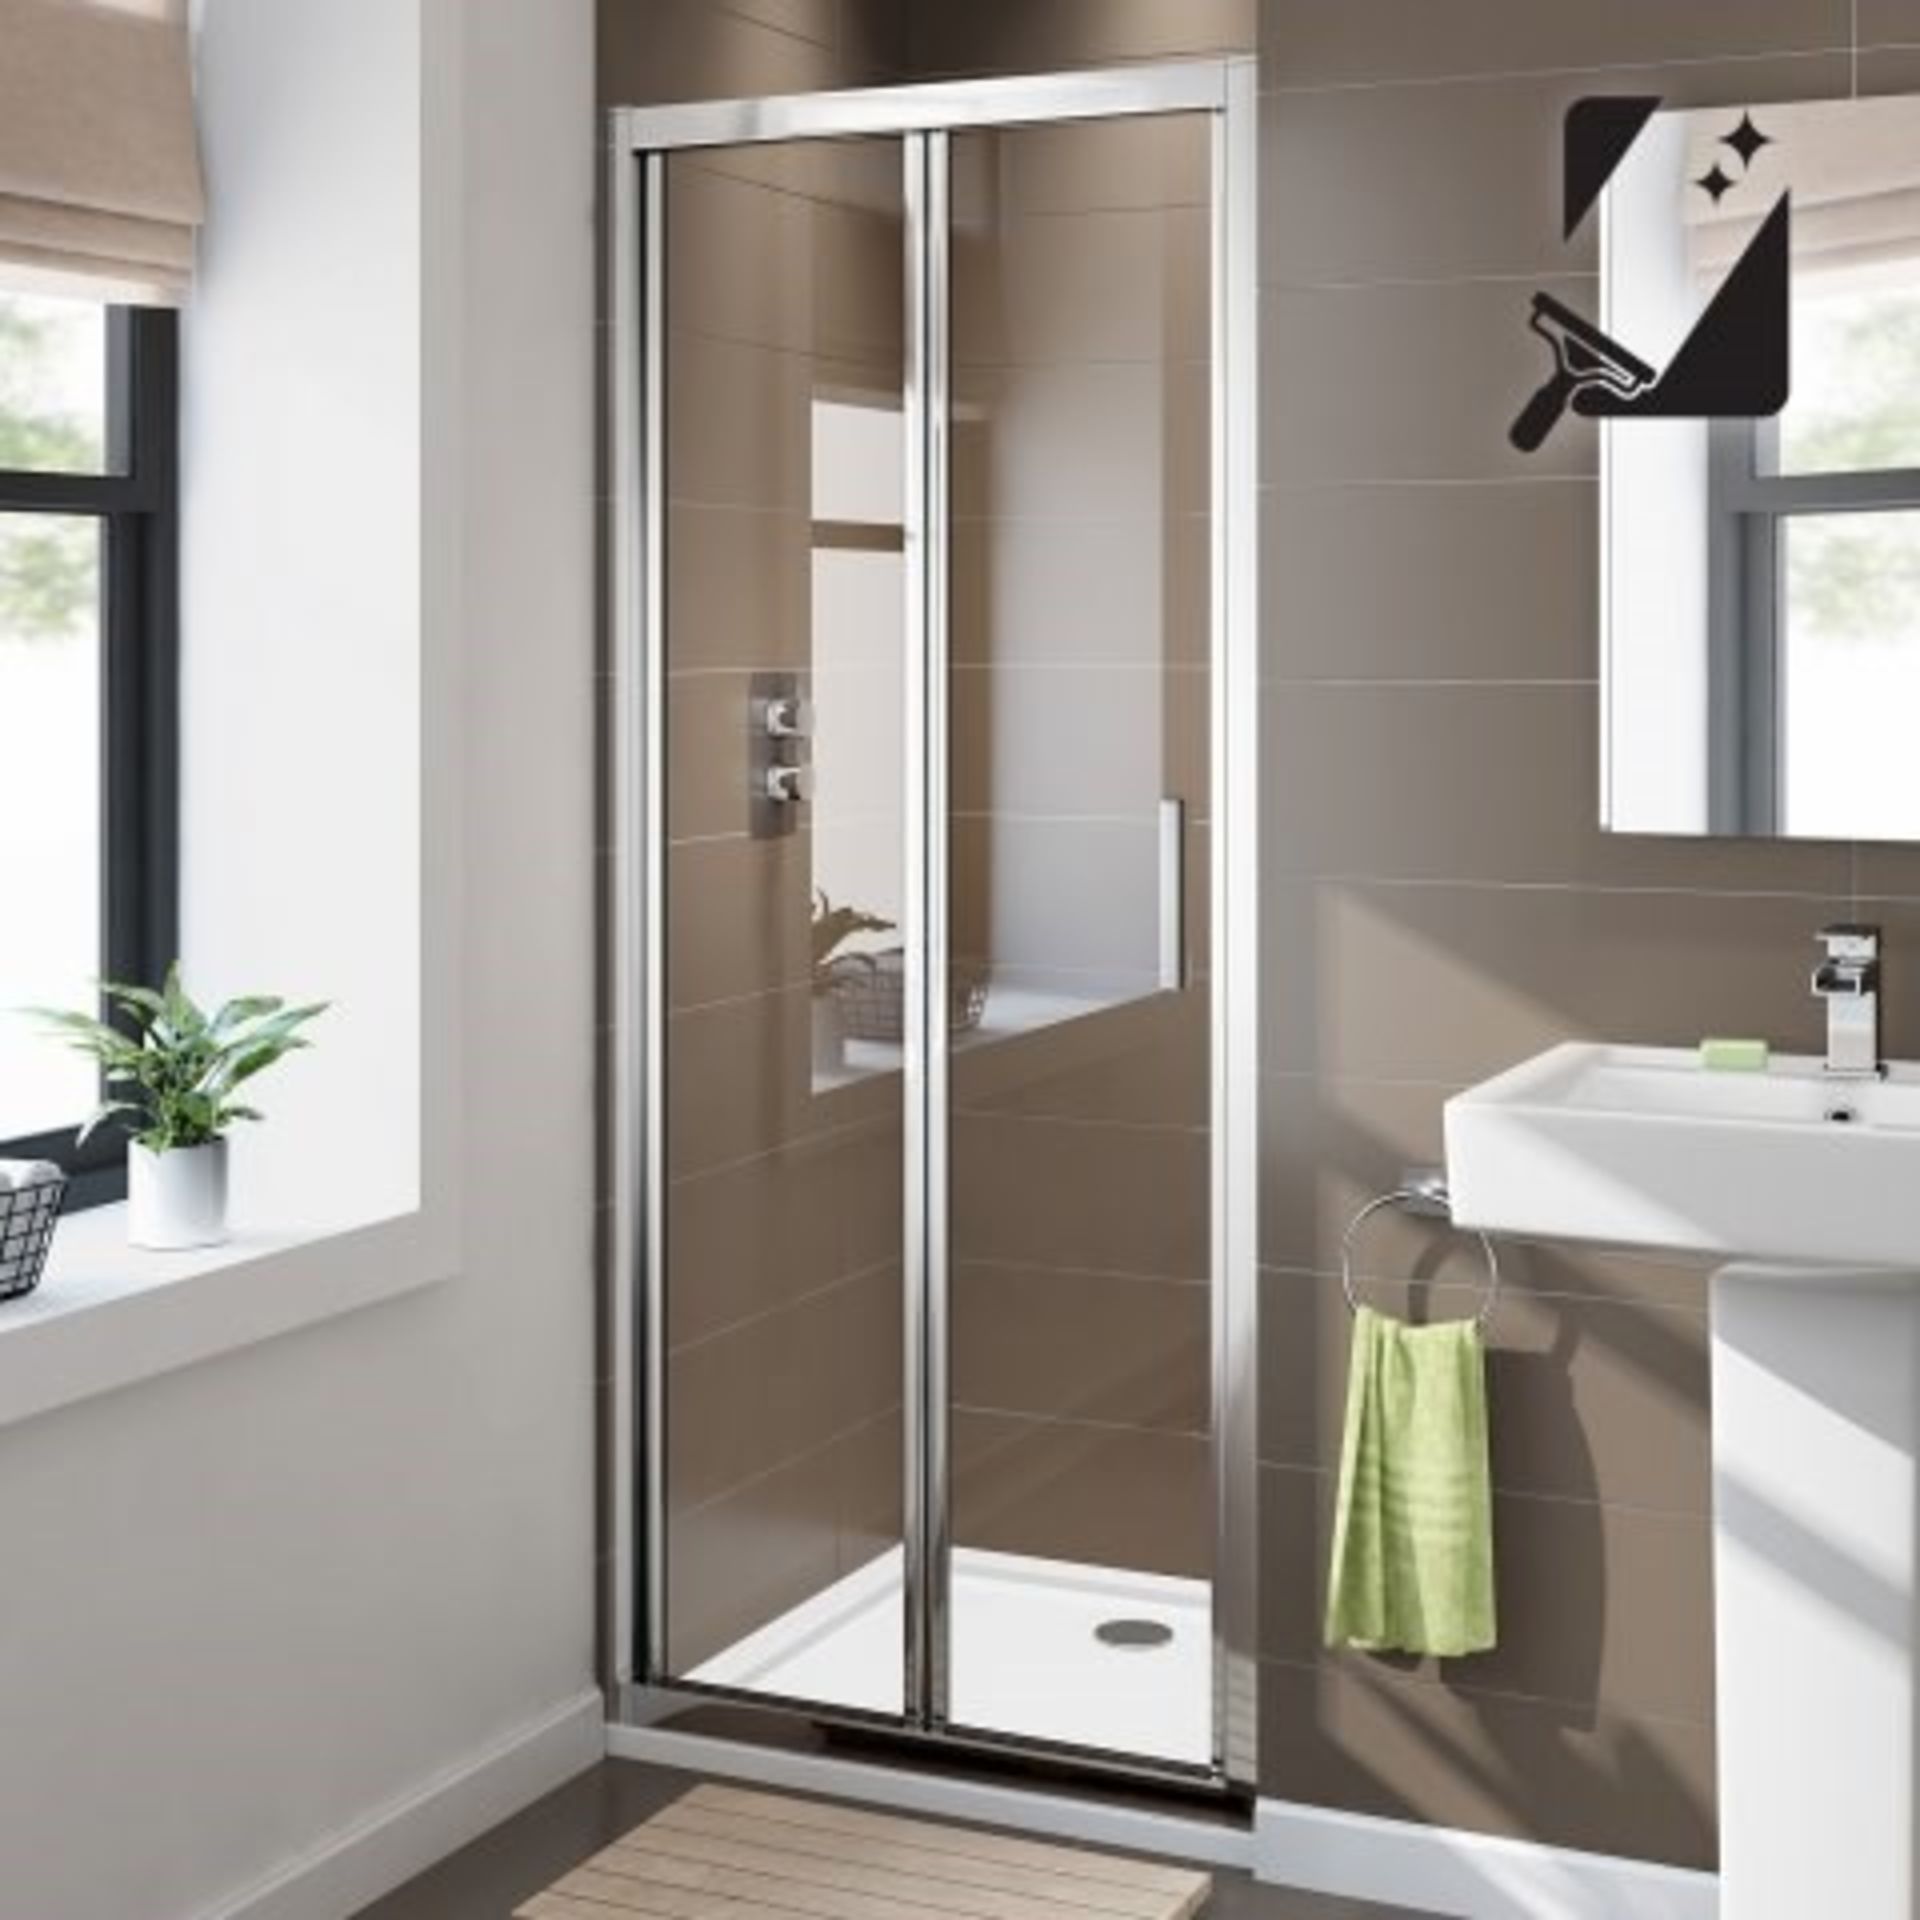 Twyfords 800mm - 6mm - Elements EasyClean Bifold Shower Door. RRP £349.99. Durability to with...